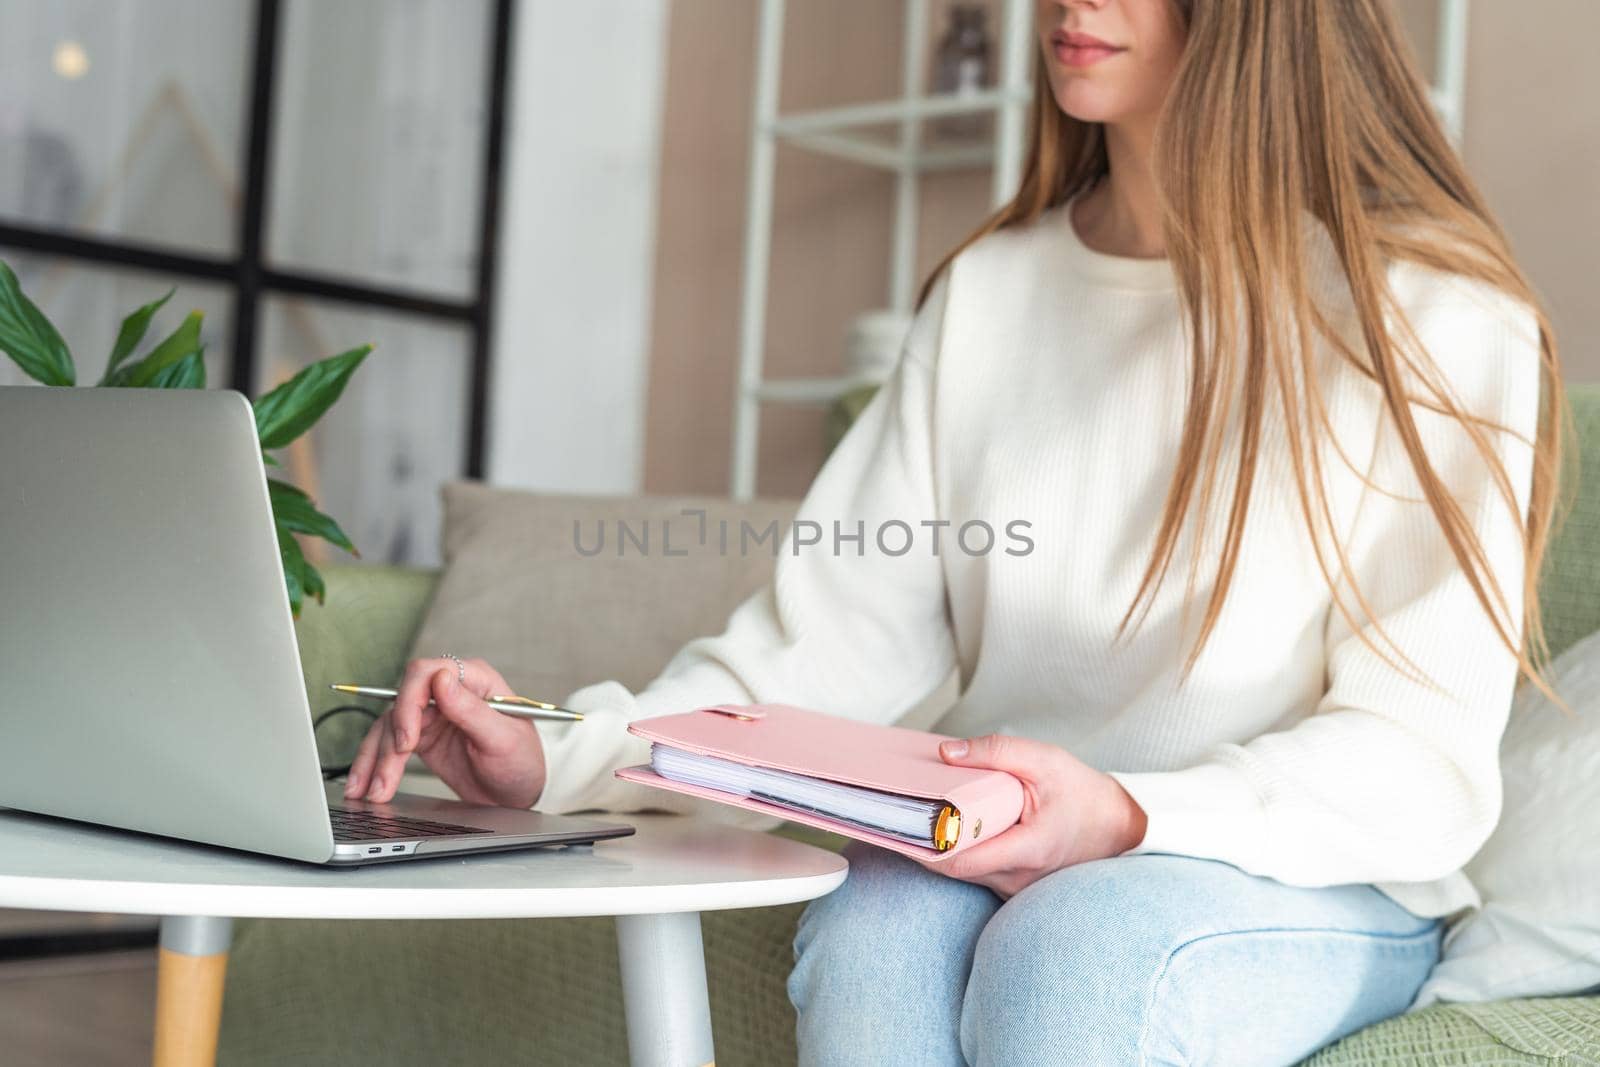 Distance learning online education and work. Business woman with notebook. Cropped freelance girl with laptop at home office. Using computer and online shops. Focus on hand